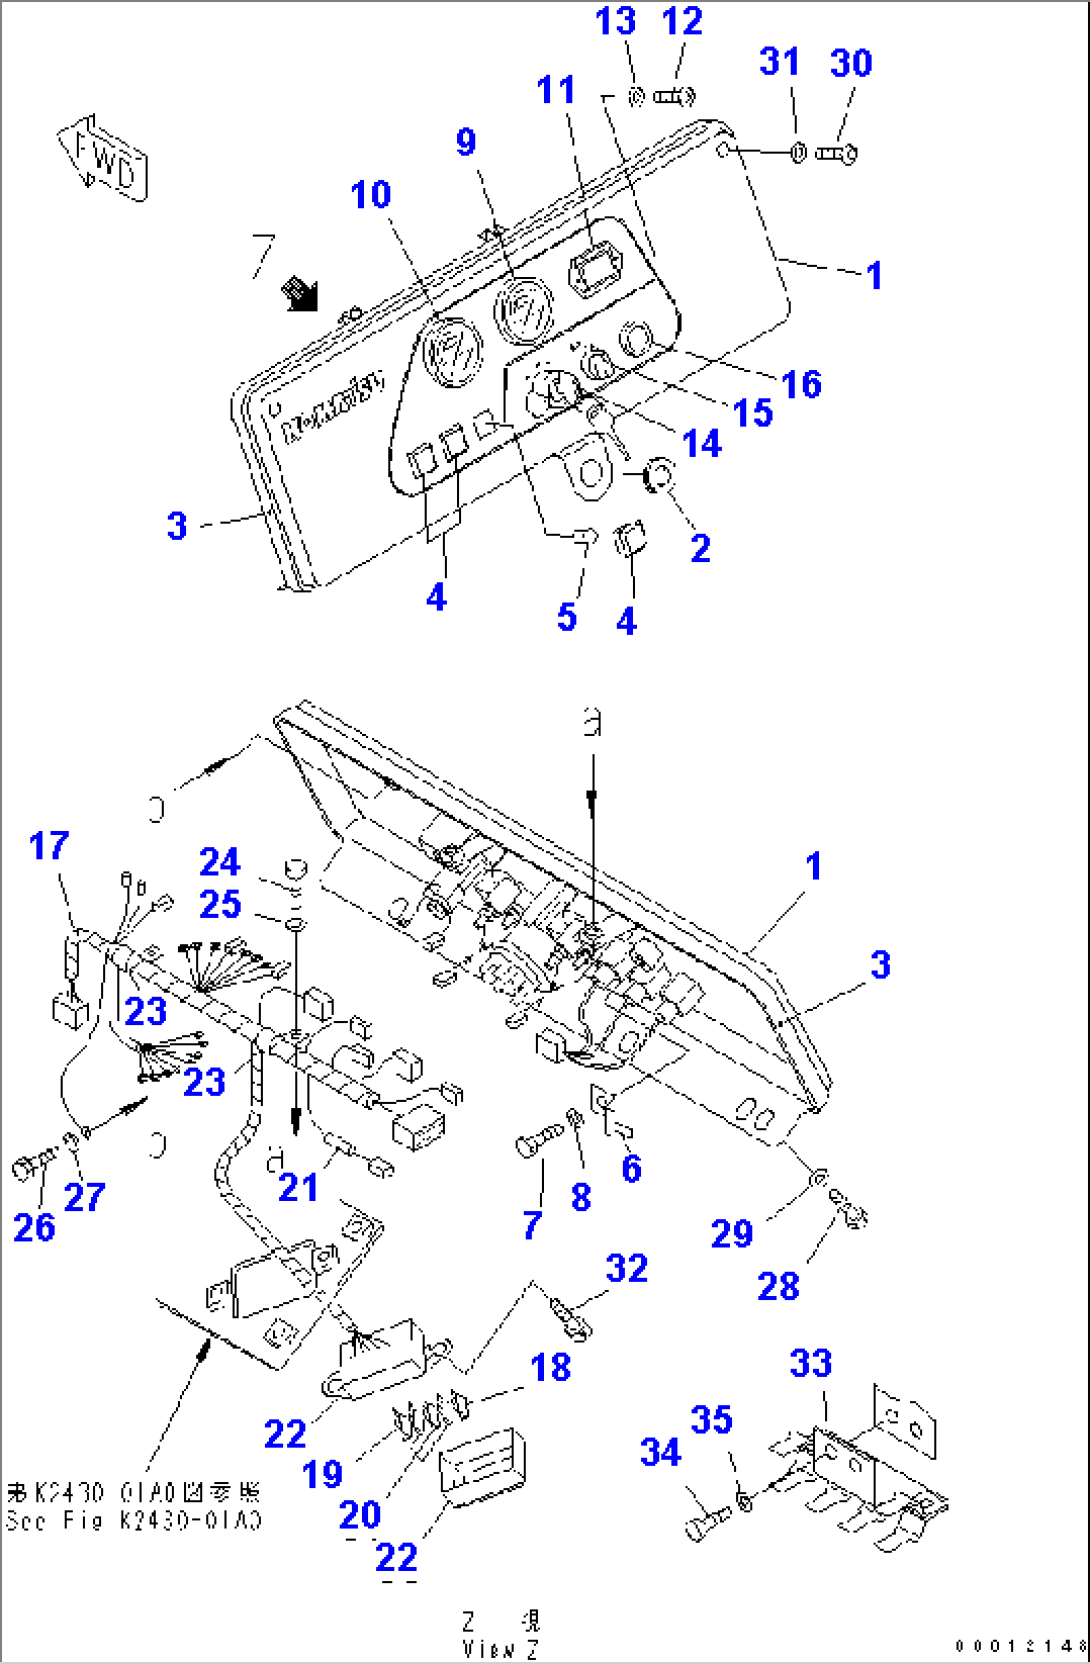 PANEL (FOR MONO LEVER STEERING)